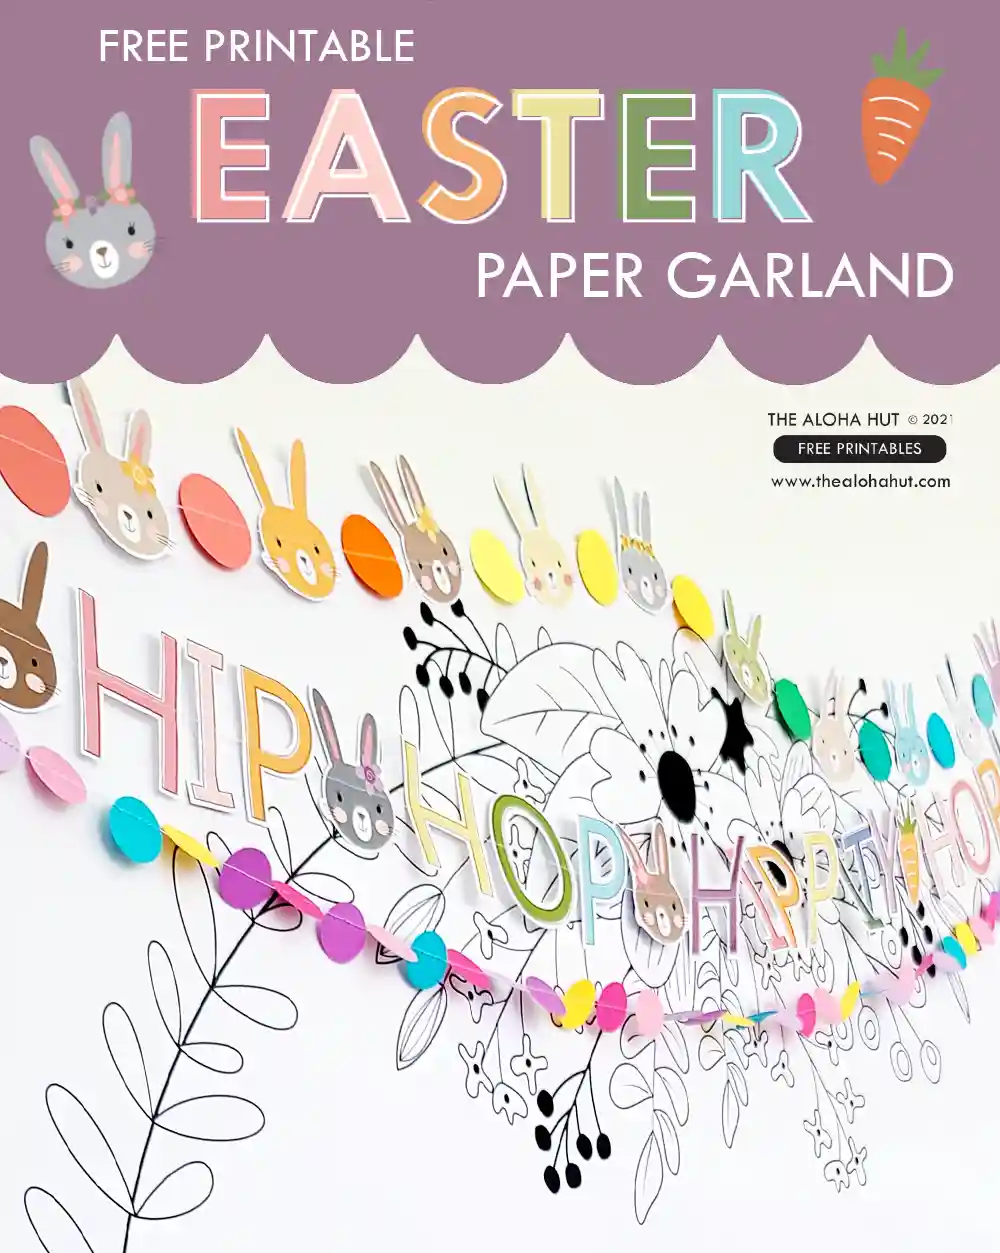 Printable giant Easter poster and Easter placemat coloring page and kids activity page to help you throw the perfect Easter brunch for your kids or for the whole family. Use the giant Easter coloring page as a backdrop for the kids table and then give each of the kids their own Easter activity coloring page and Easter placemat to color during the Easter meal.